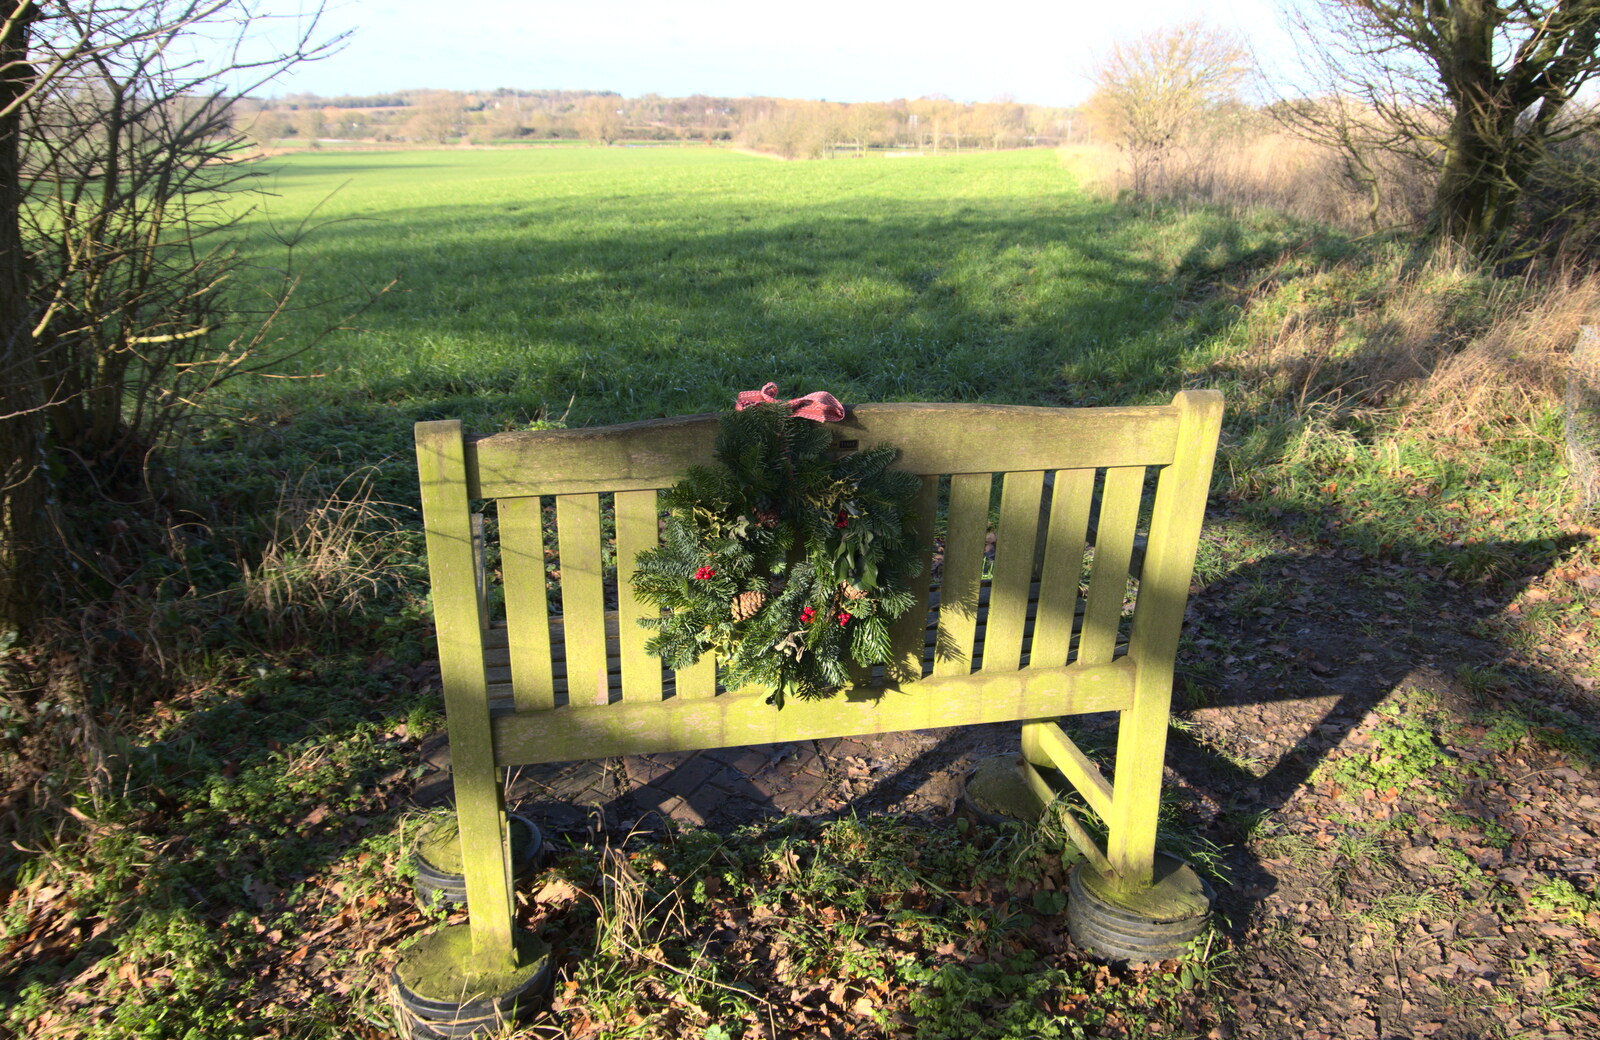 Peter Allen's memorial bench from Winter Lockdown Walks, Thrandeston and Brome, Suffolk - 24th January 2021